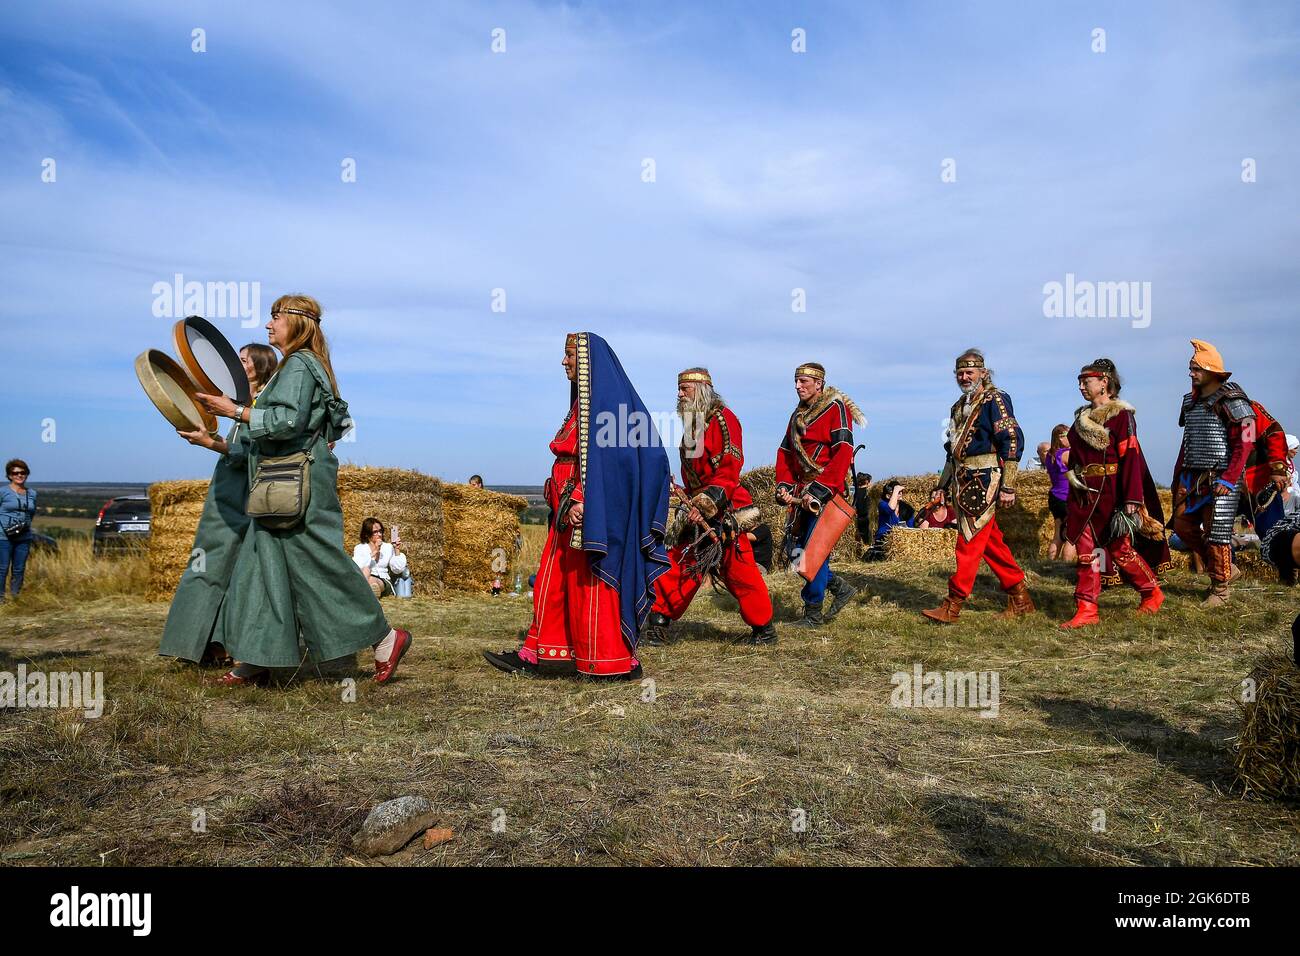 ZAPORIZHZHIA REGION, UKRAINE - SEPTEMBER 11, 2021 - History enthusiasts are pictured during the Legends of Steppe 2021 Open Folk Festival on Mount Oba Stock Photo